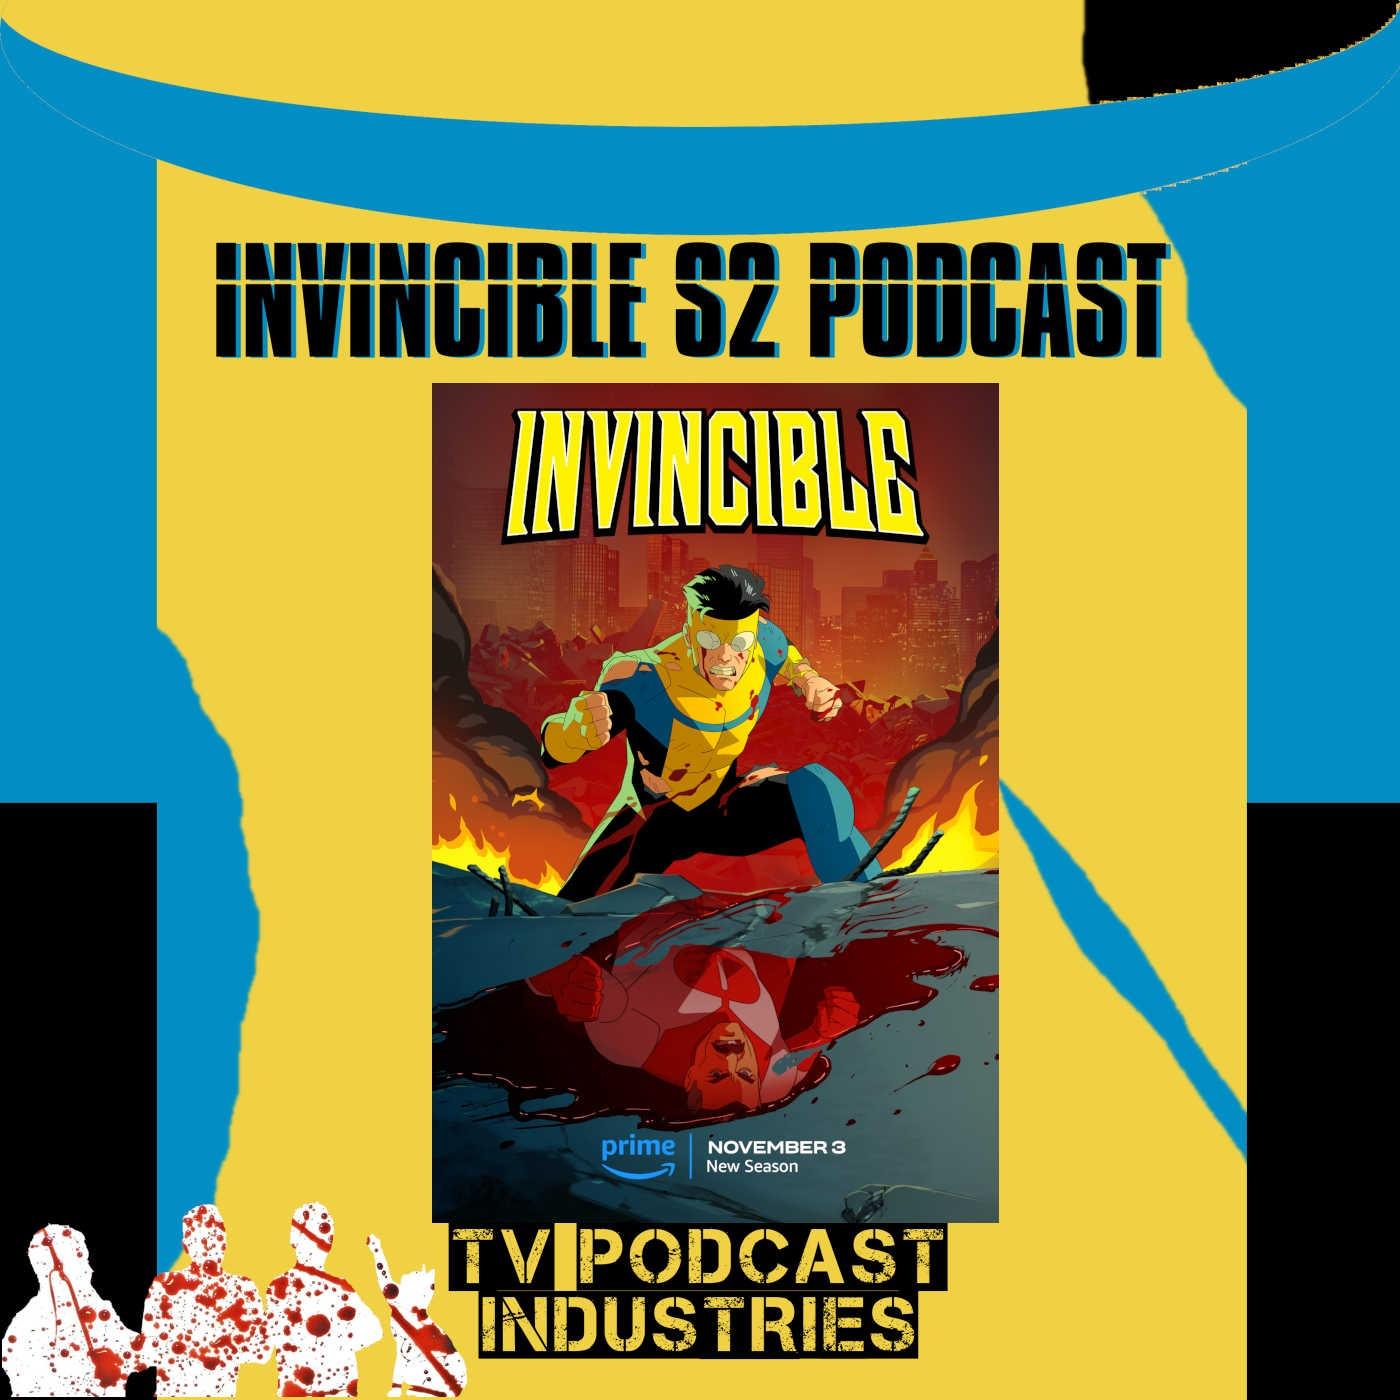 Invincible Season 2 Ep. 4 Clip: Atom Eve's Anger Gets the Best of Her